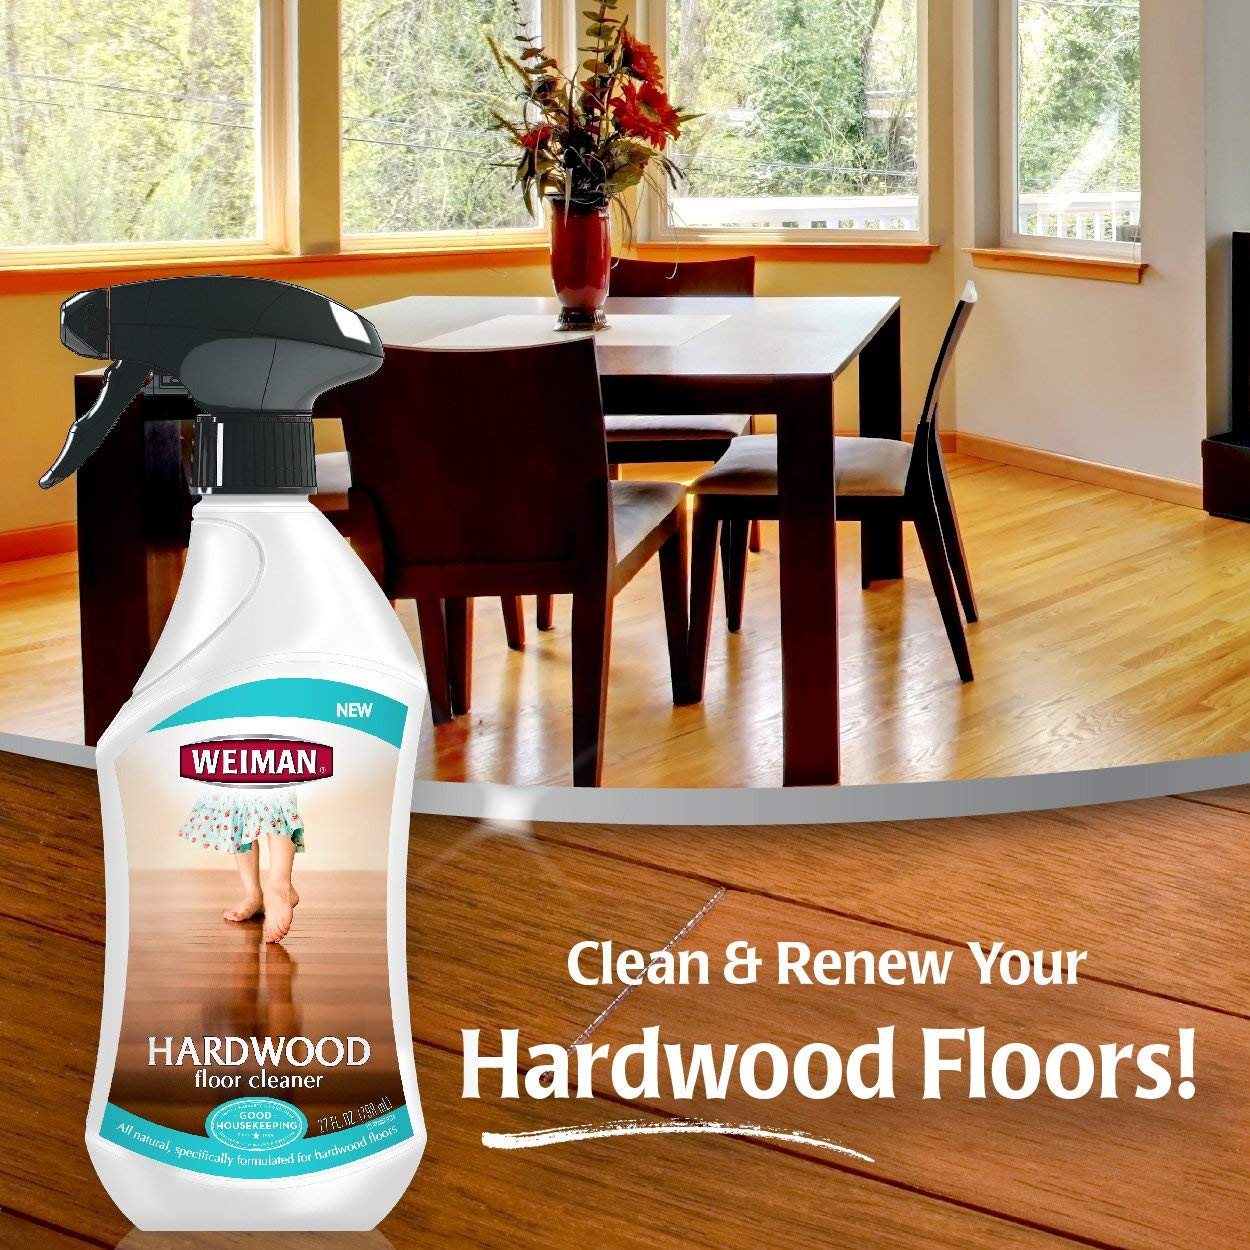 28 Recommended Hardwood Floor Care after Refinishing 2024 free download hardwood floor care after refinishing of amazon com weiman hardwood floor cleaner surface safe no harsh in amazon com weiman hardwood floor cleaner surface safe no harsh scent safe for use a